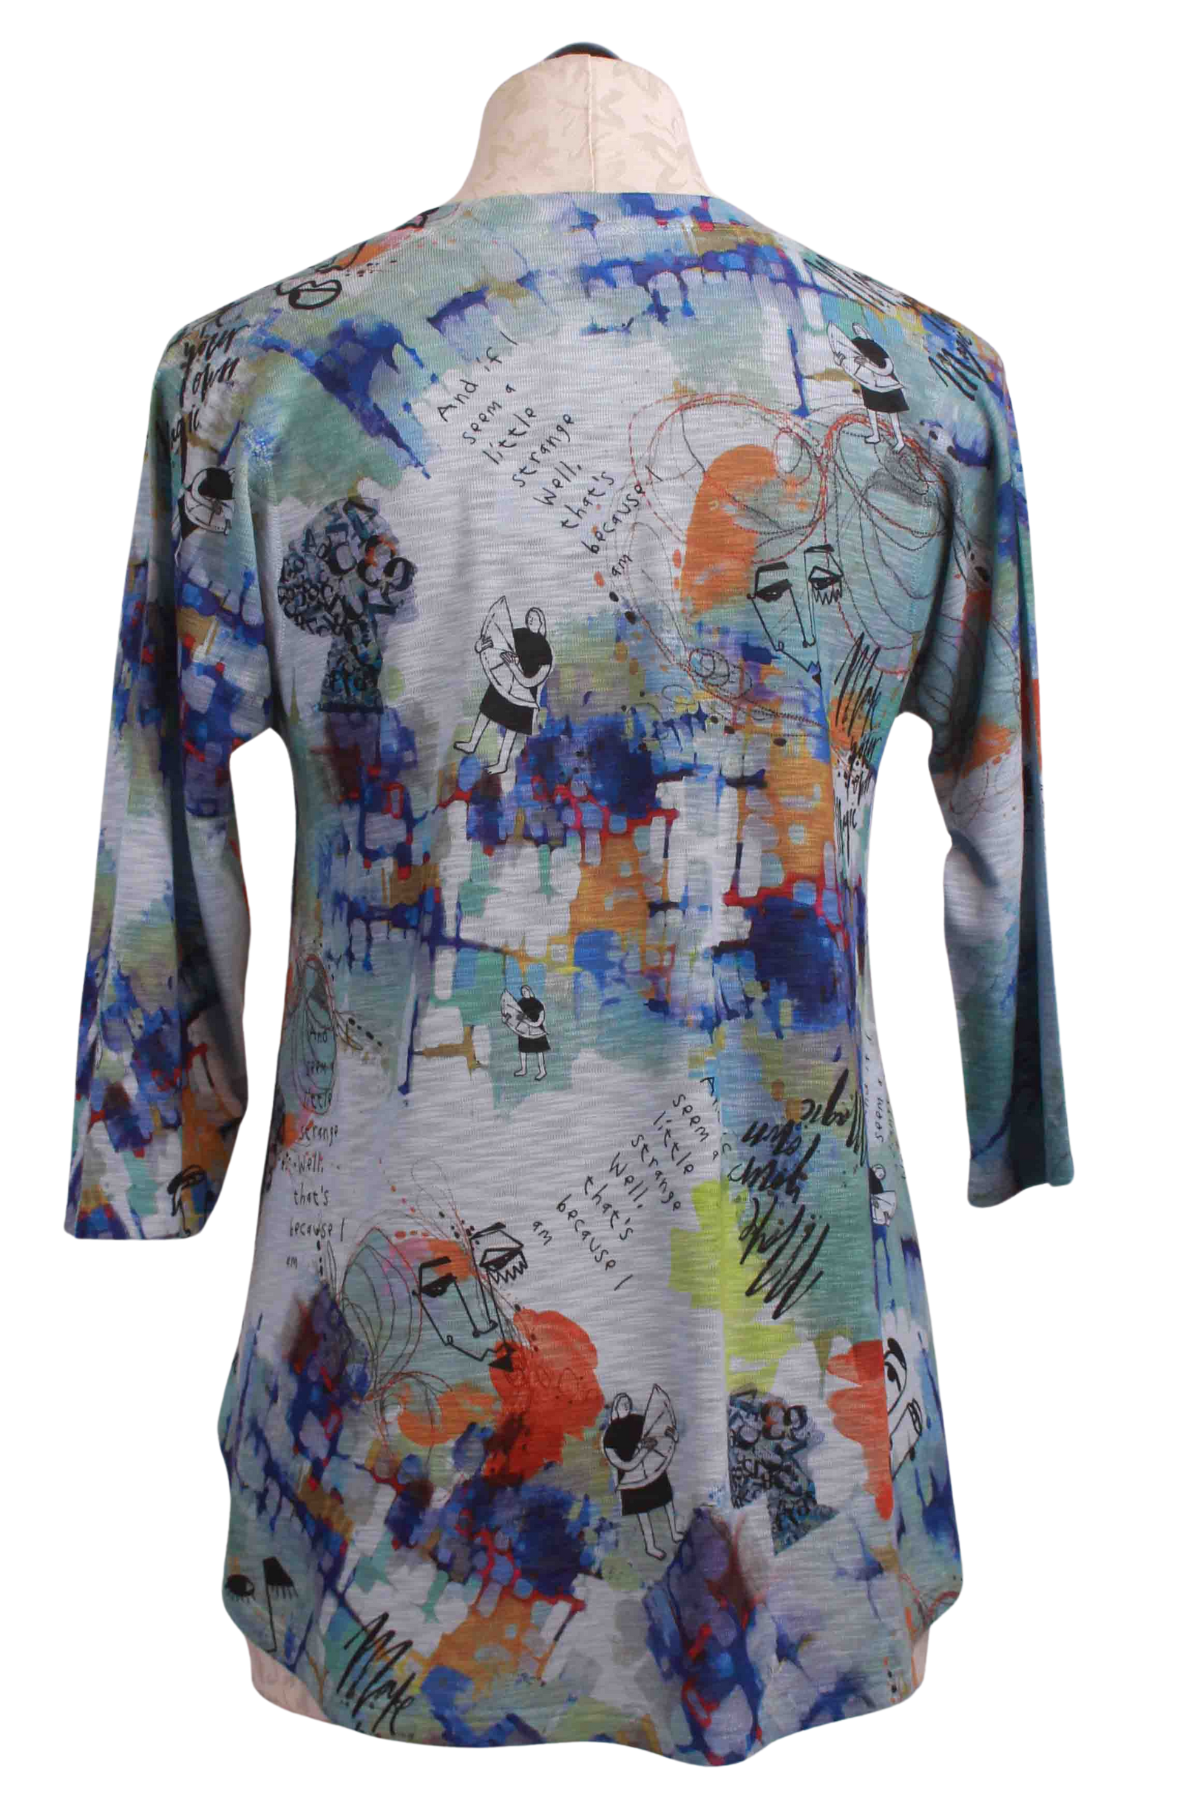 back view of Town Magic Print A Line V Neck Top by Inoah